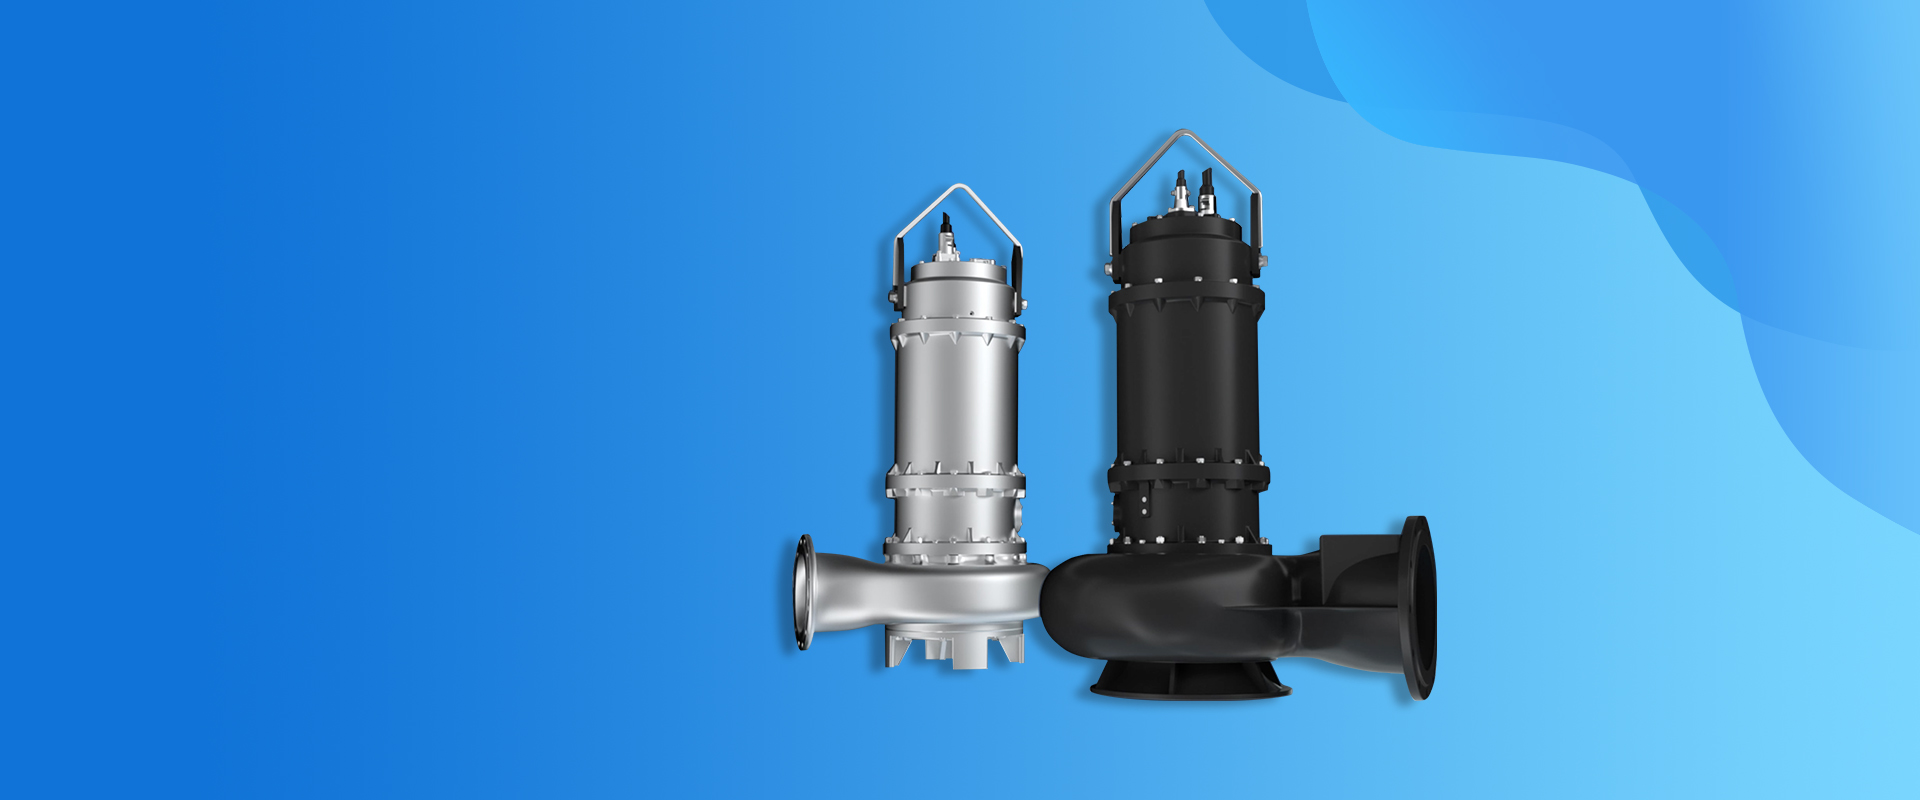 stainless steel submersible pump manufacturer